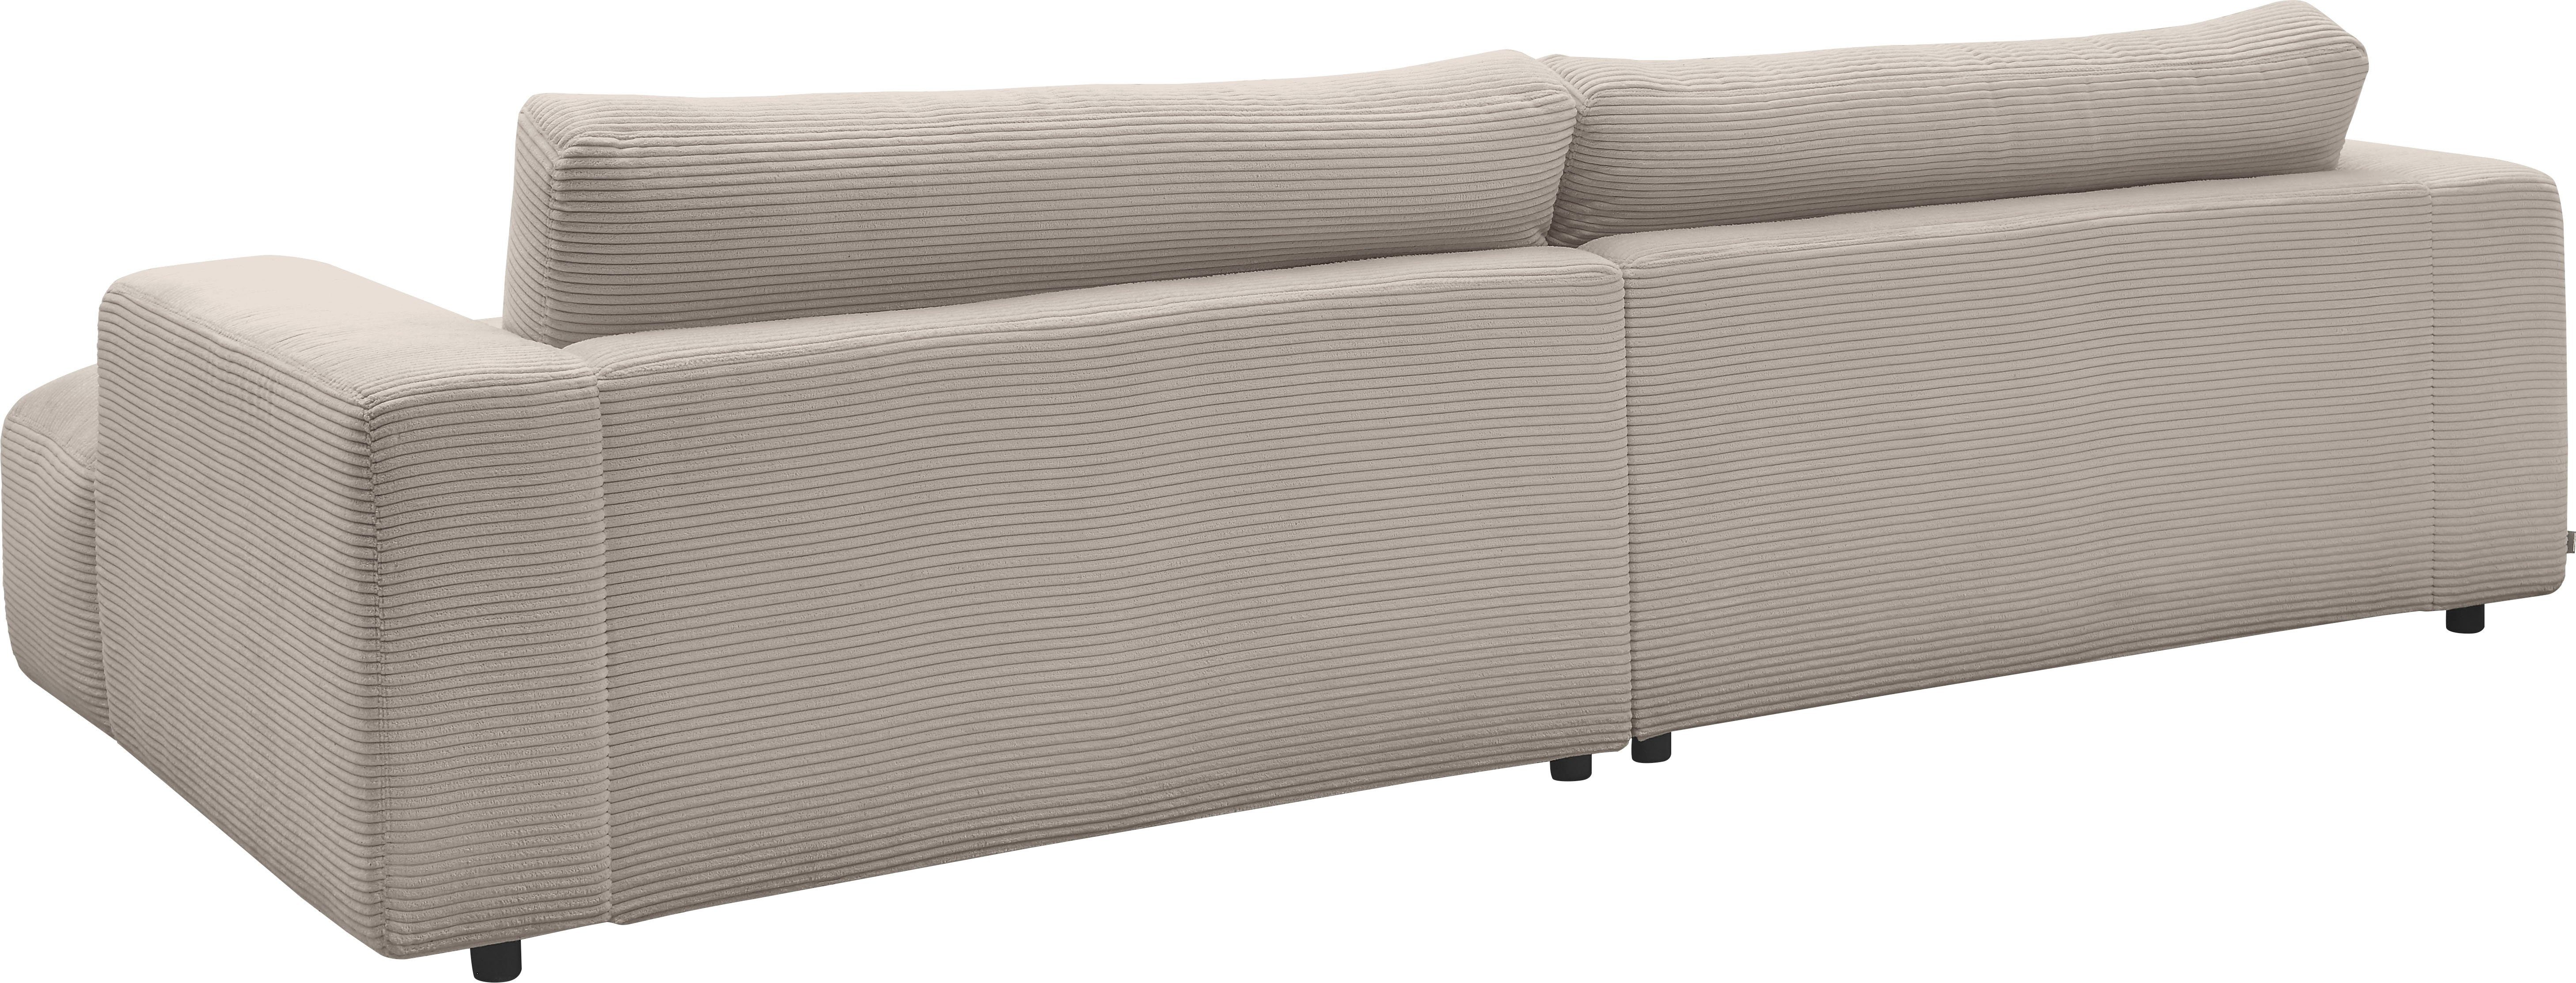 GALLERY M branded by 292 cm Loungesofa Cord-Bezug, light-grey Musterring Lucia, Breite